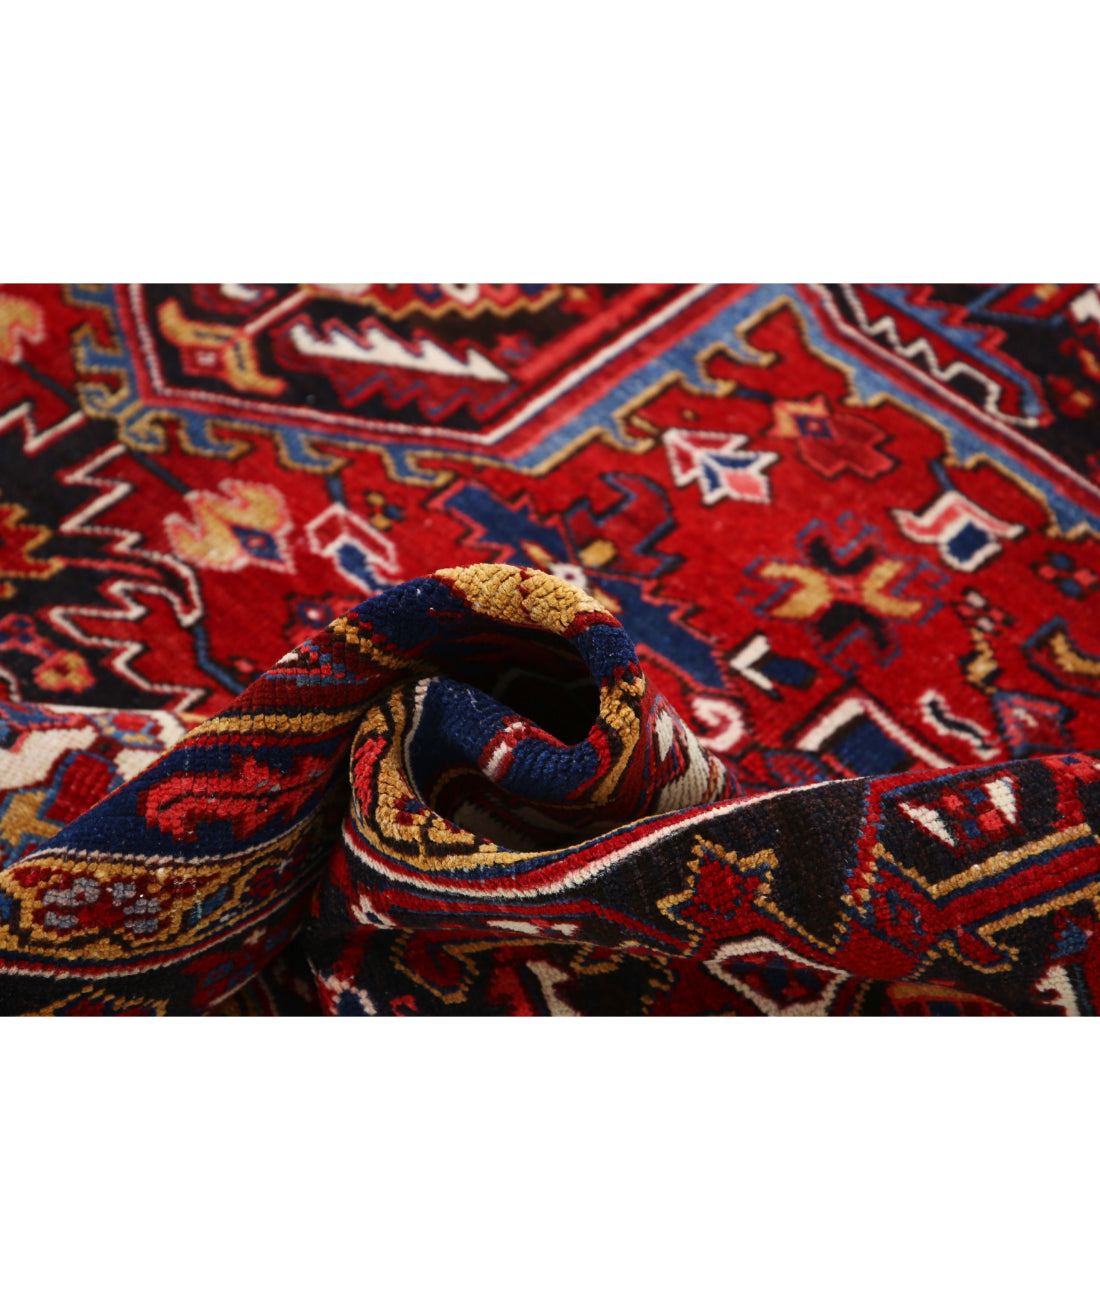 Hand Knotted Antique Persian Heriz Wool Rug - 8'11'' x 11'8'' 8'11'' x 11'8'' (268 X 350) / Red / Blue